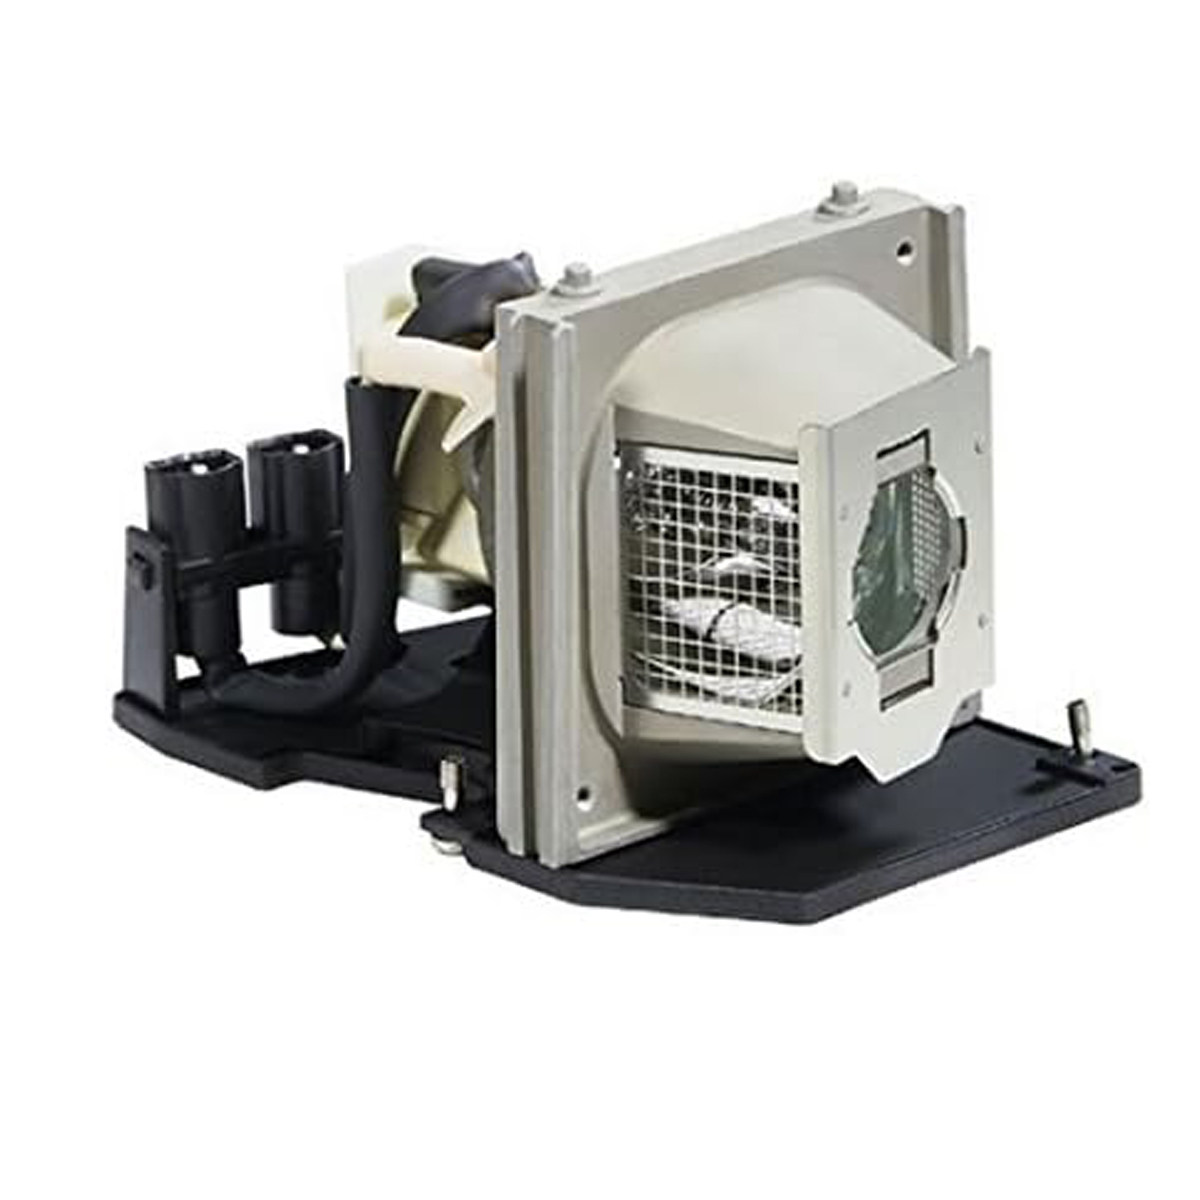 Replacement Projector lamp POA-LMP133 For  SANYO PDG-DSU30